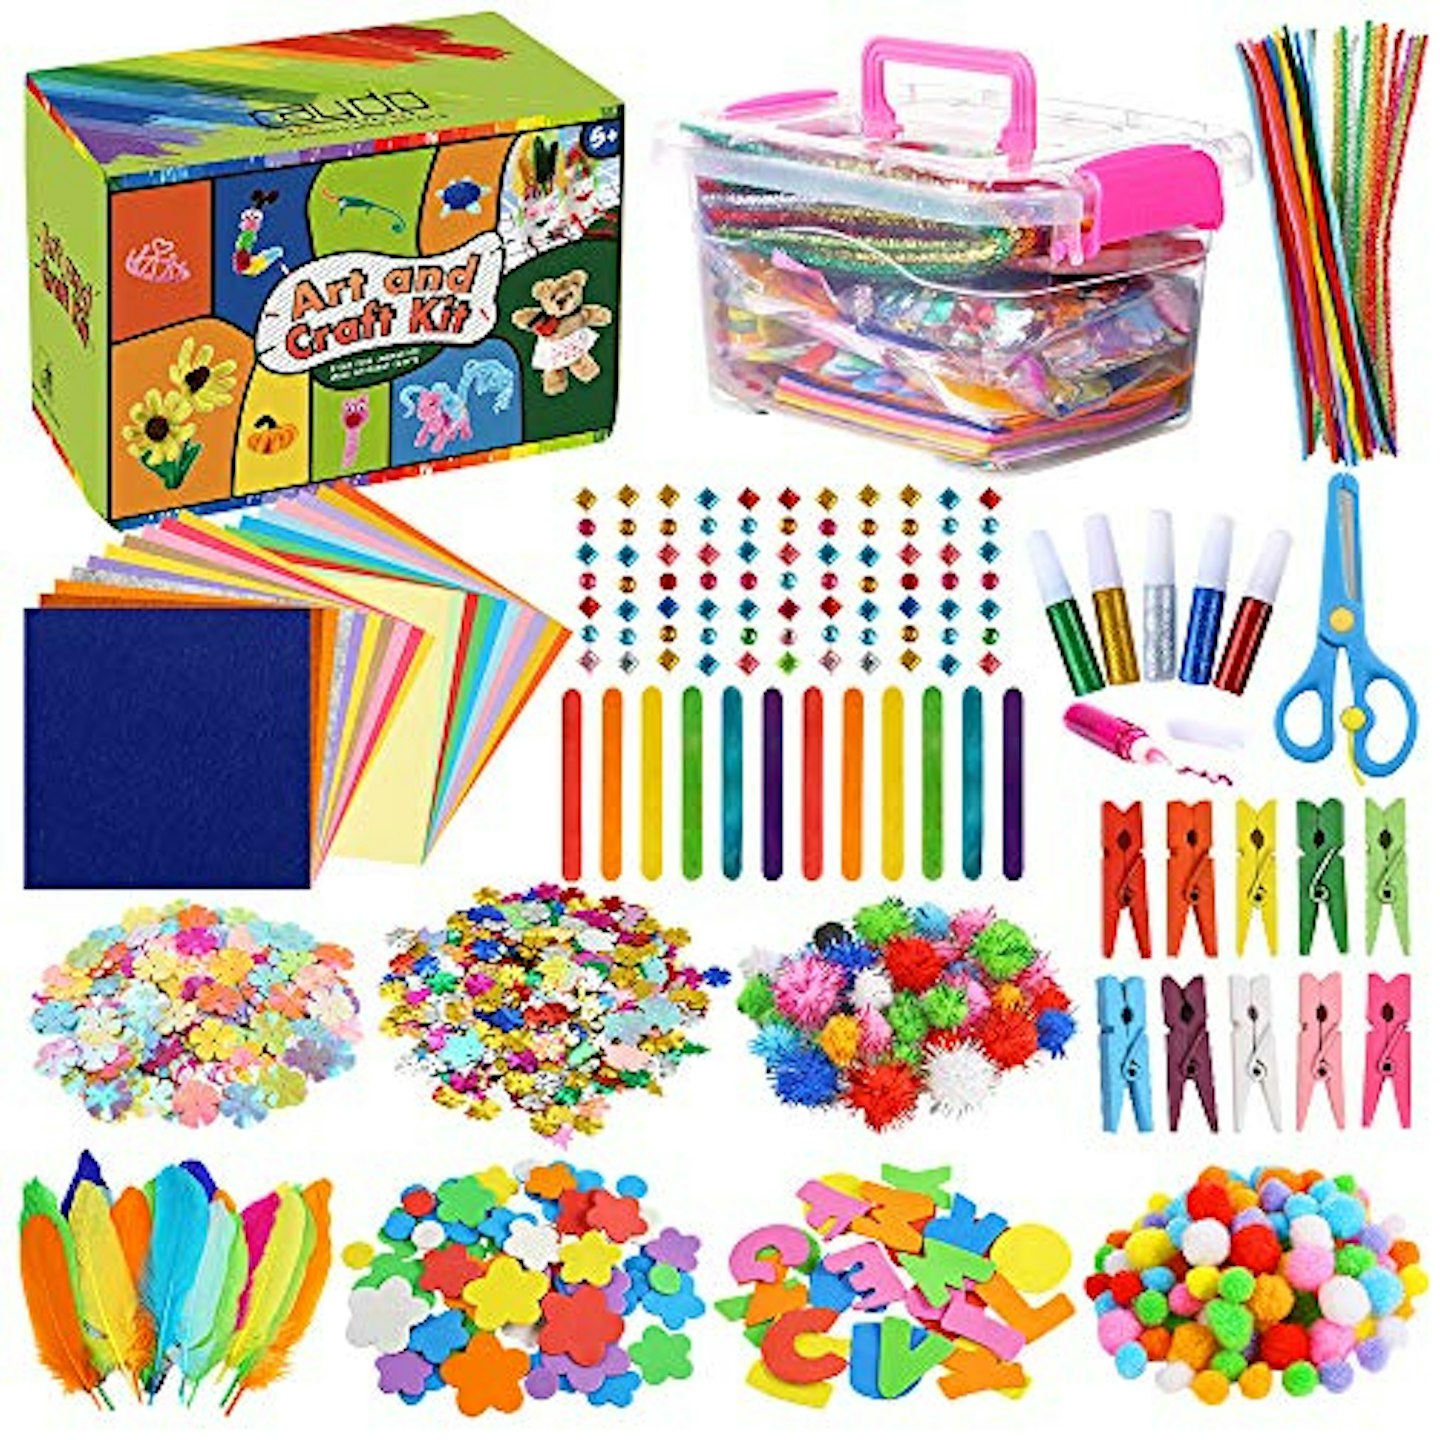 Caydo Arts and Crafts Supplies for Kids 